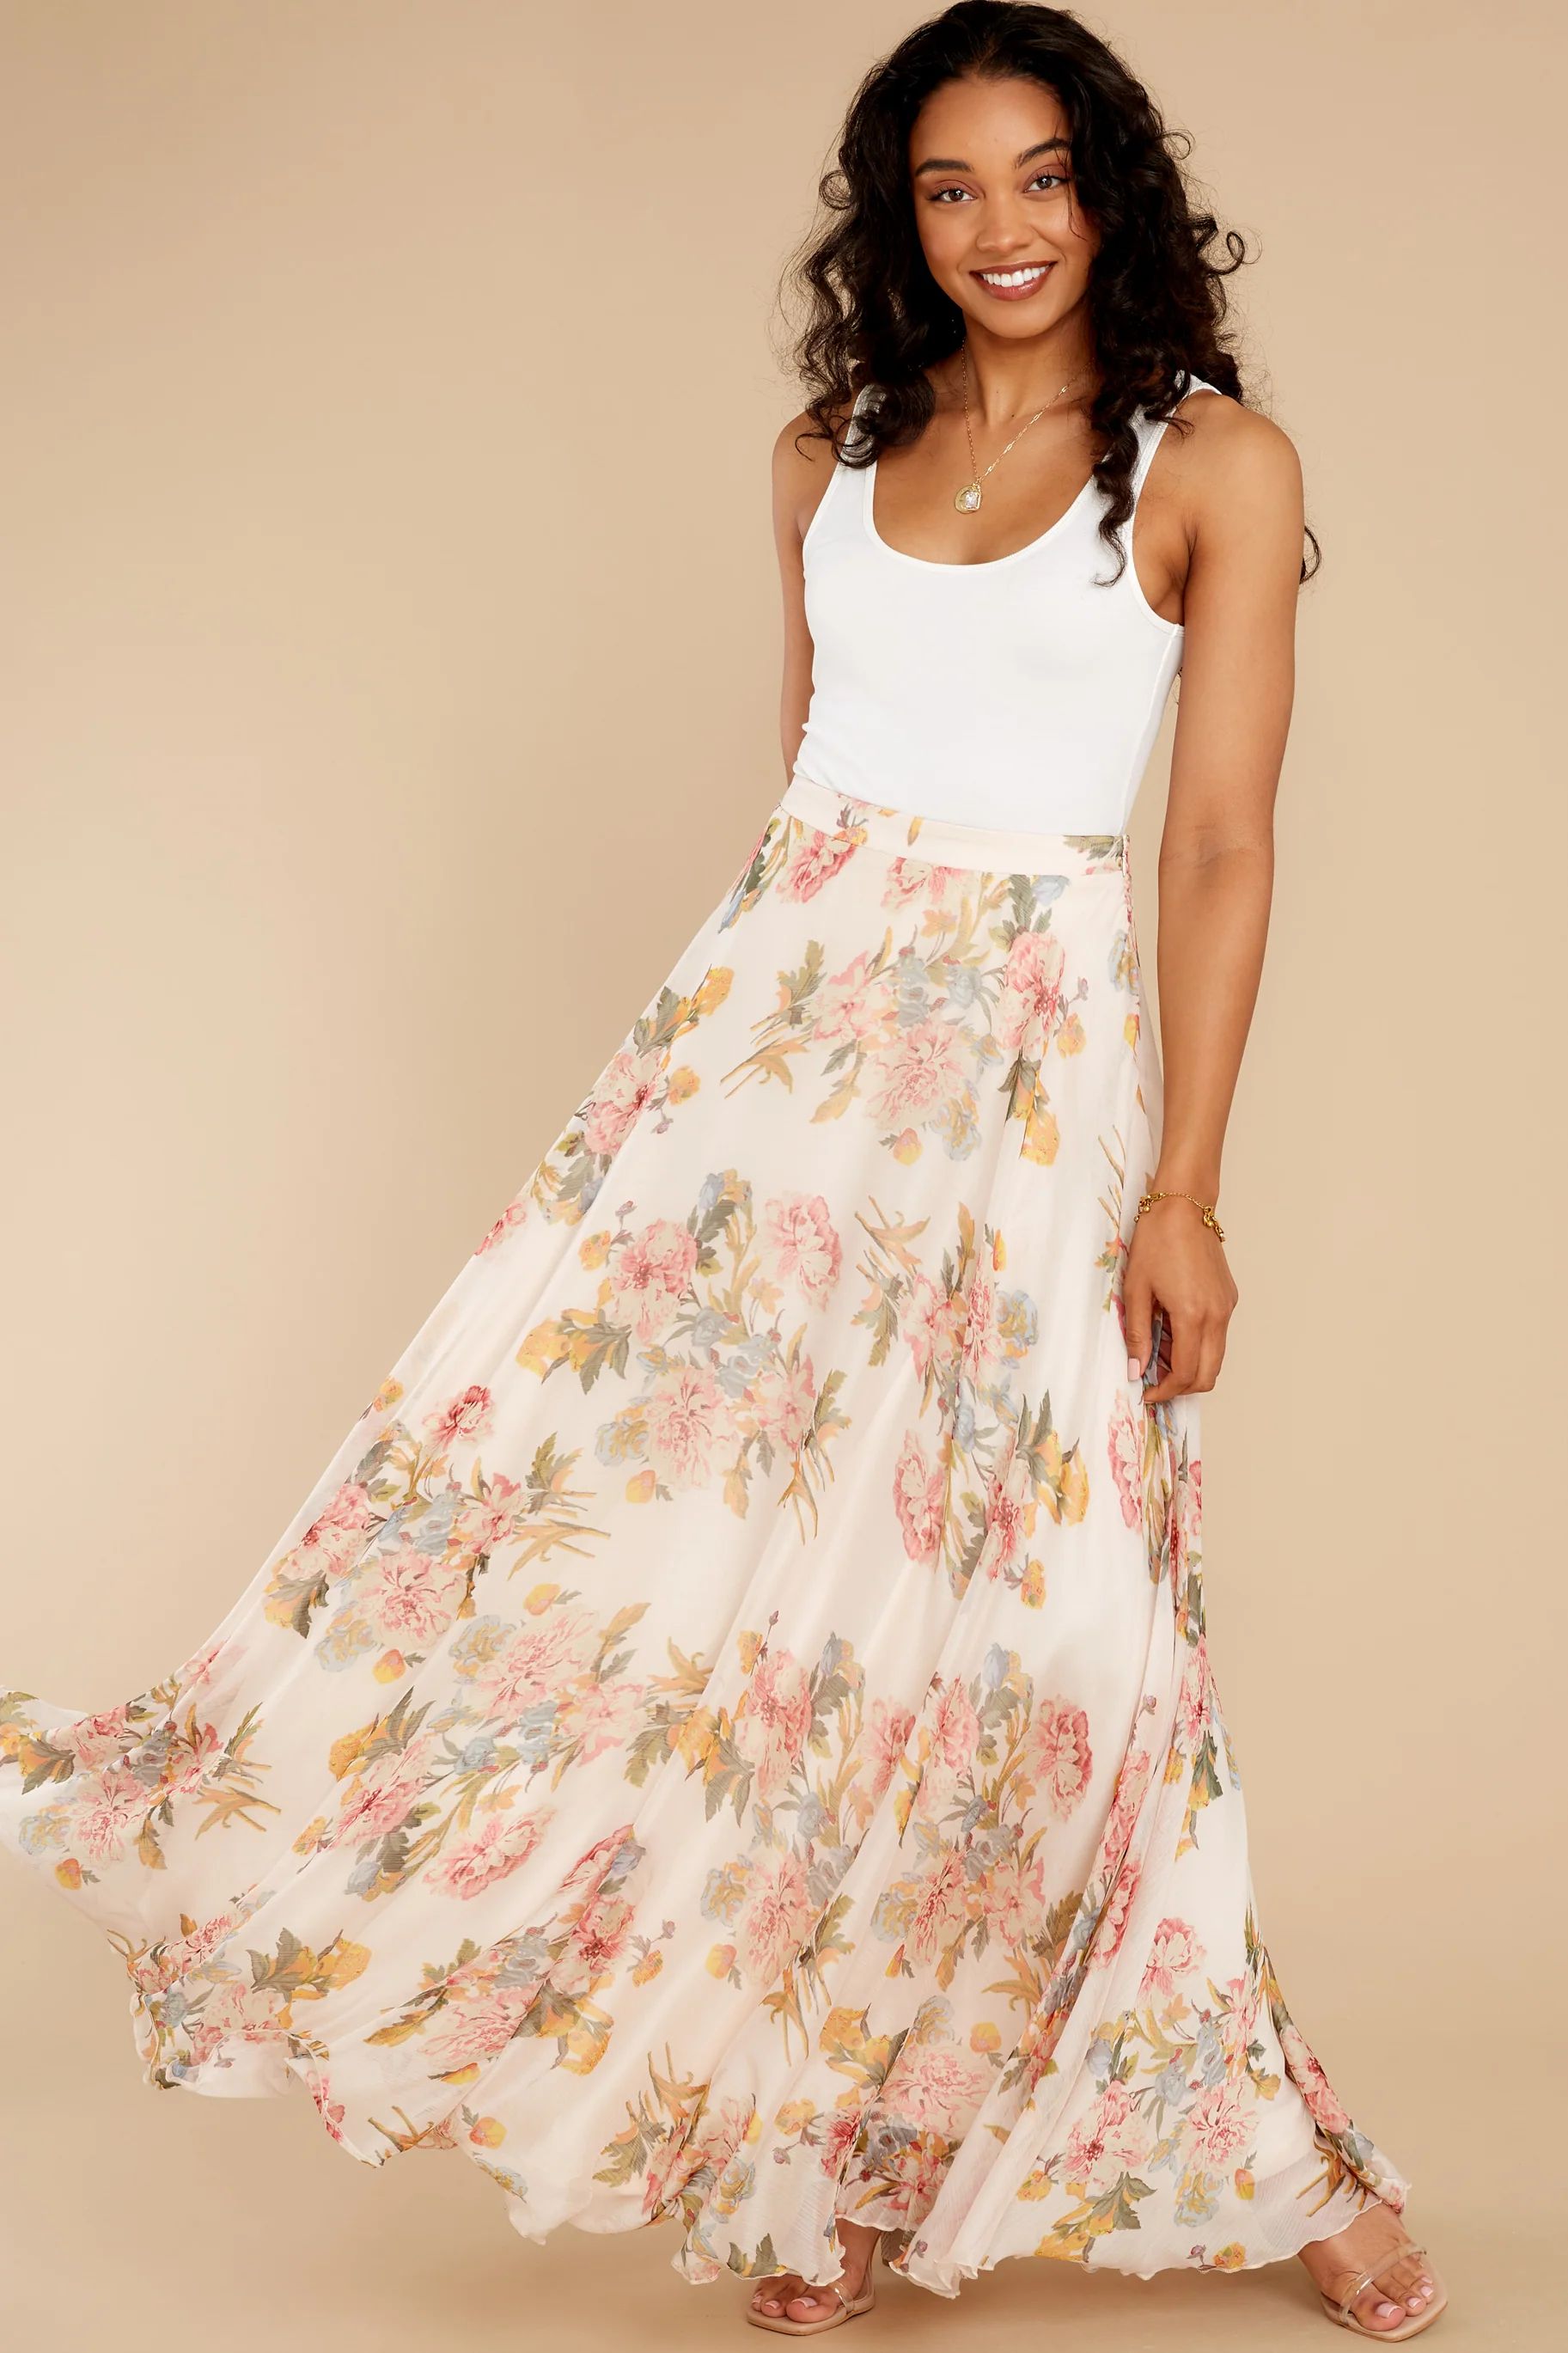 Part Of The Spell Blush Floral Print Maxi Skirt | Red Dress 